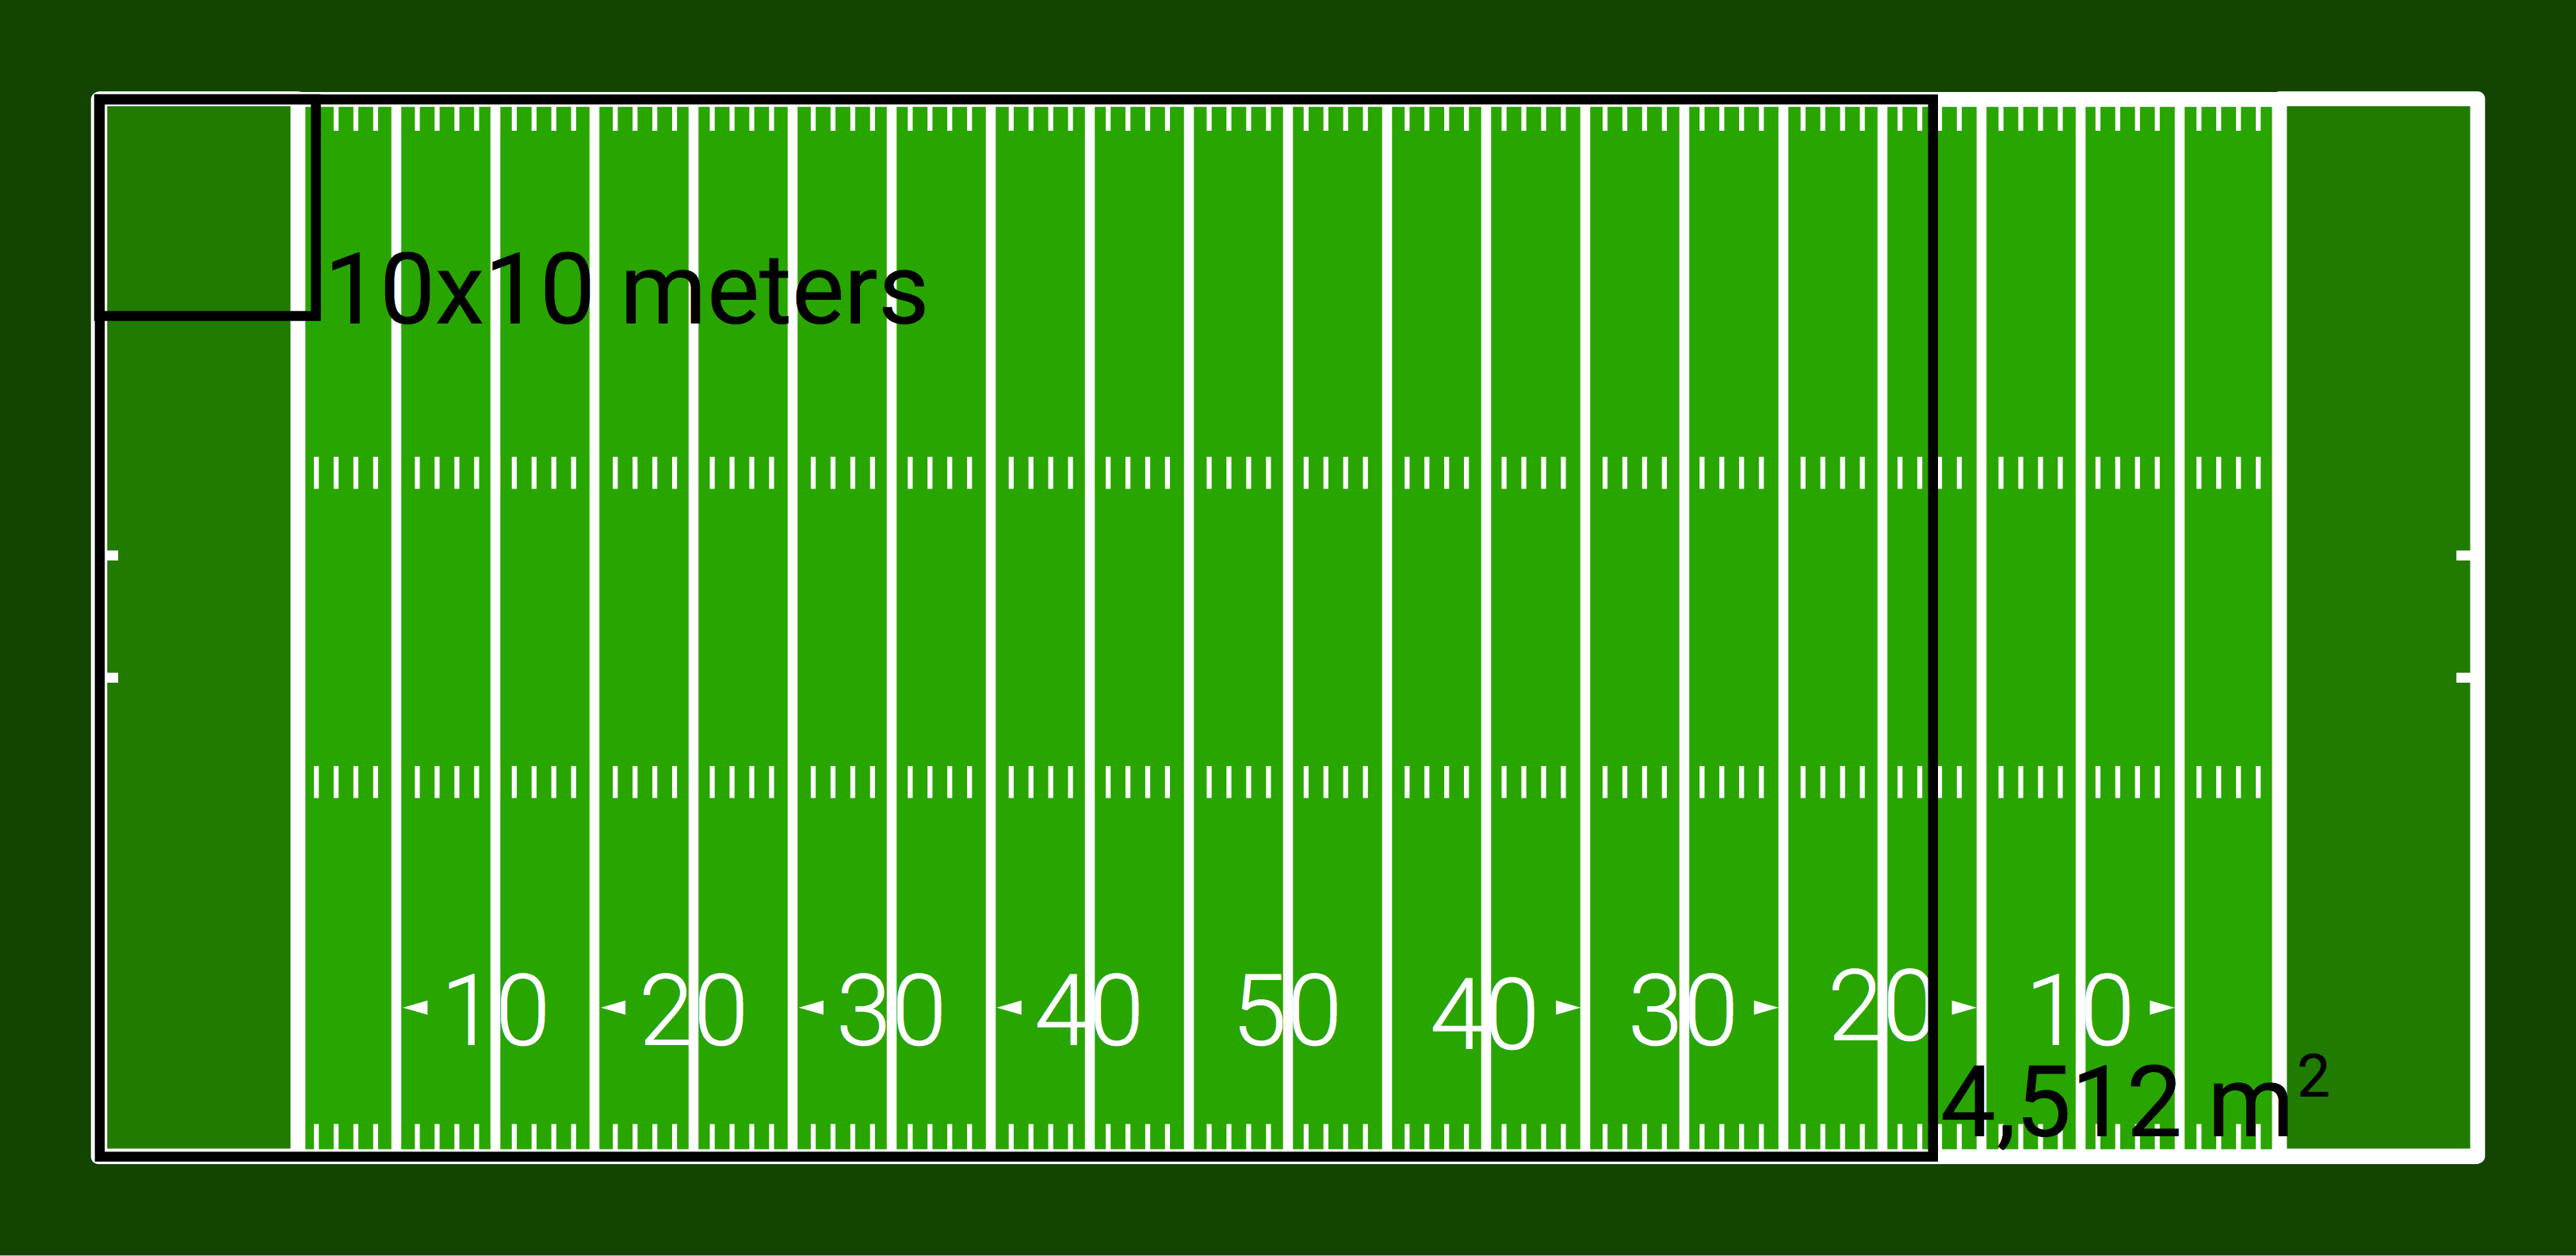 Diagram 2. An American football field compared to a household field. A 10x10 meter square is included for reference. A household field is approximately the same size as an American football field, excluding the endzones.